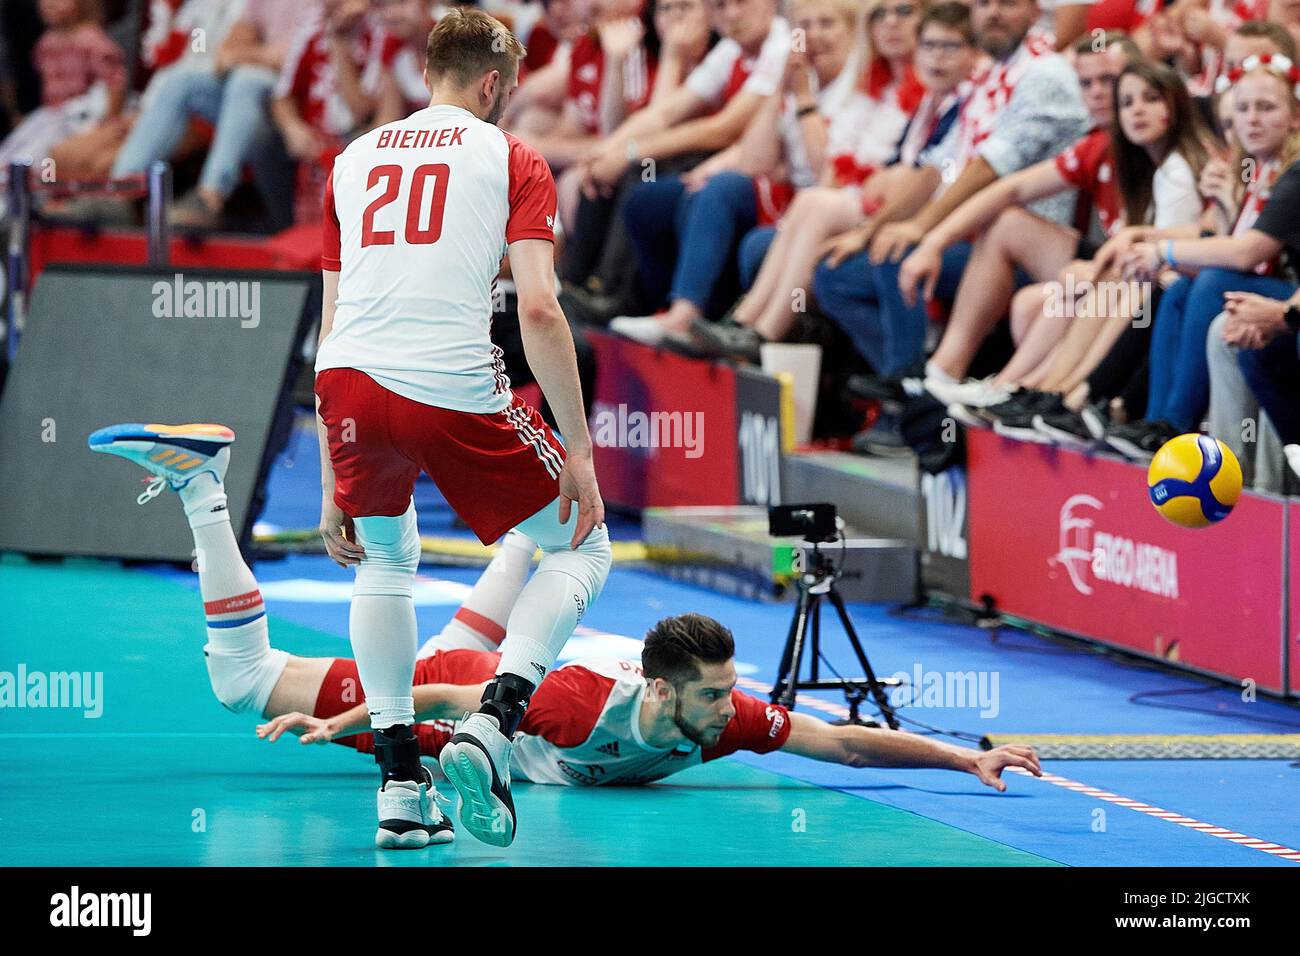 Aleksander Sliwka (R) and Mateusz Bieniek (L) of Poland during the 2022 men's FIVB Volleyball Nations League match between Poland and the Netherlands in Gdansk, Poland, 09 July 2022. Stock Photo